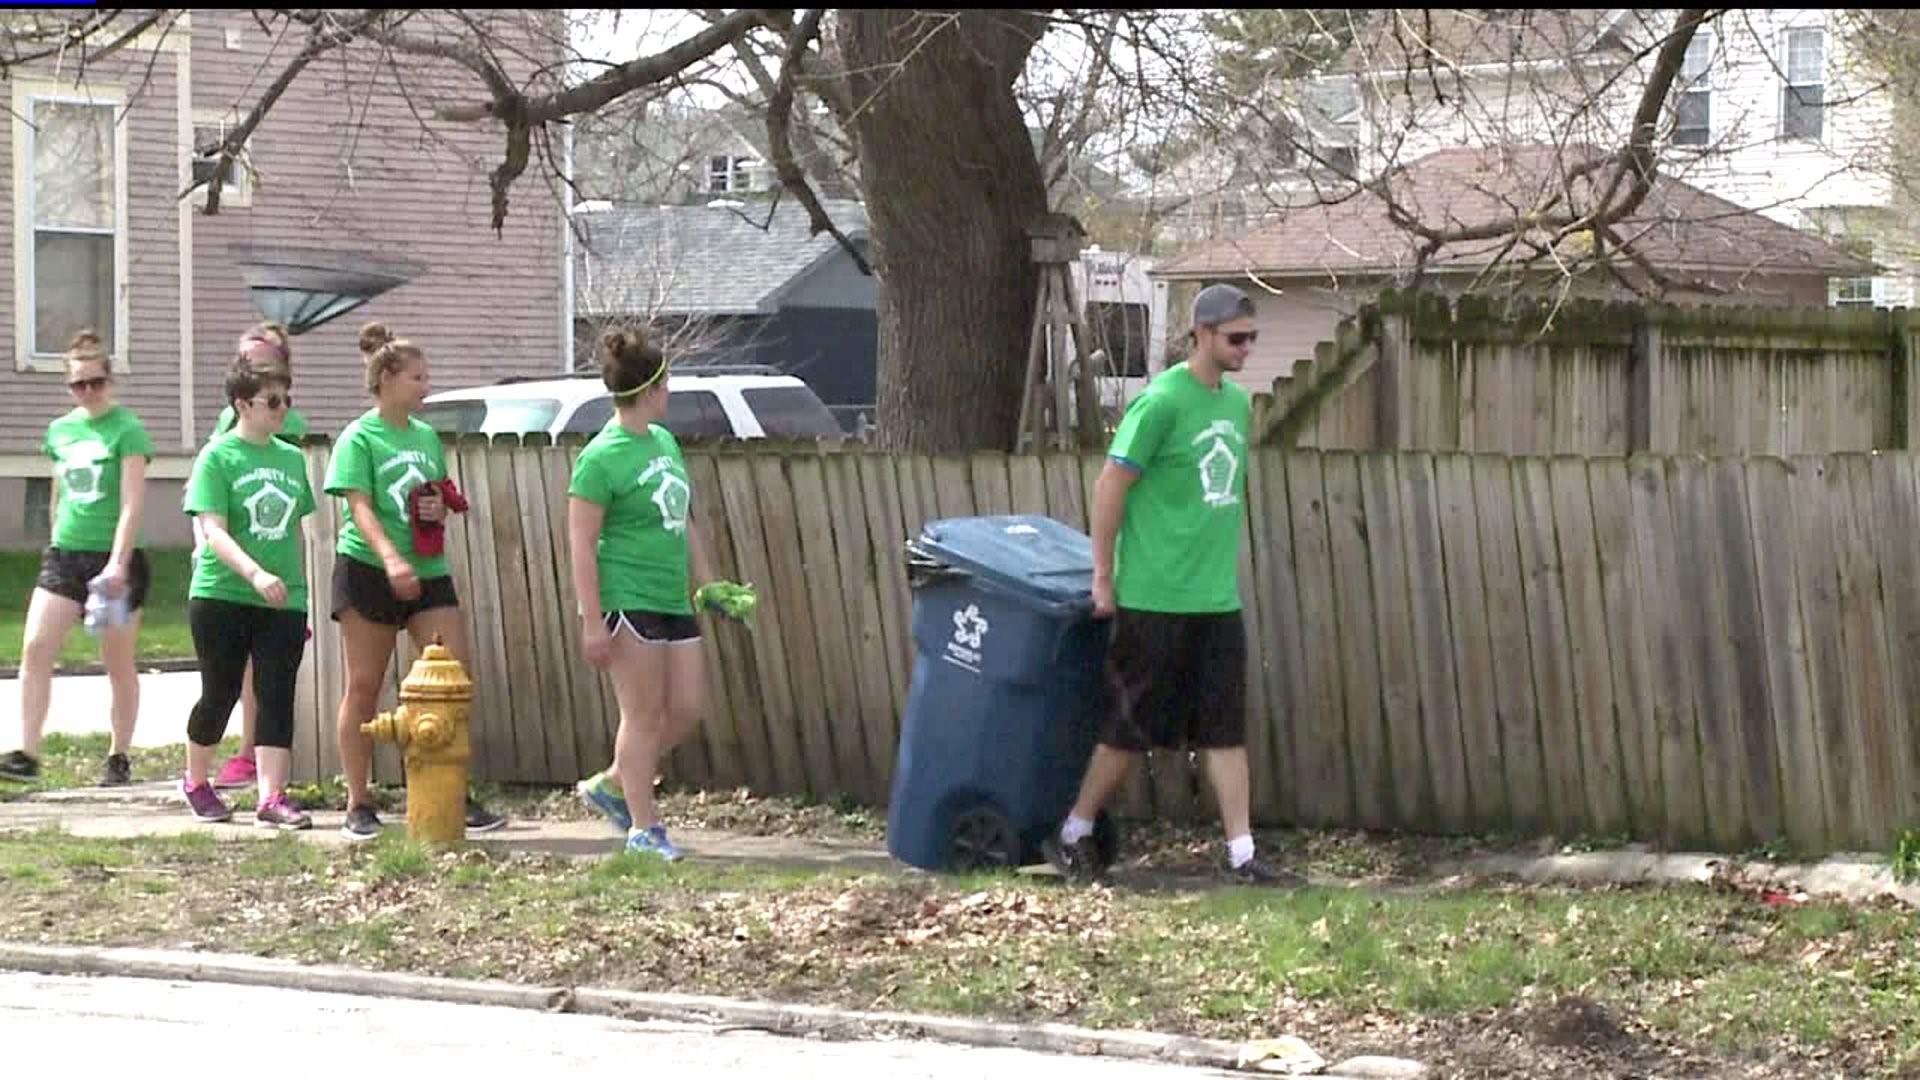 Annual Community Day spring clean up